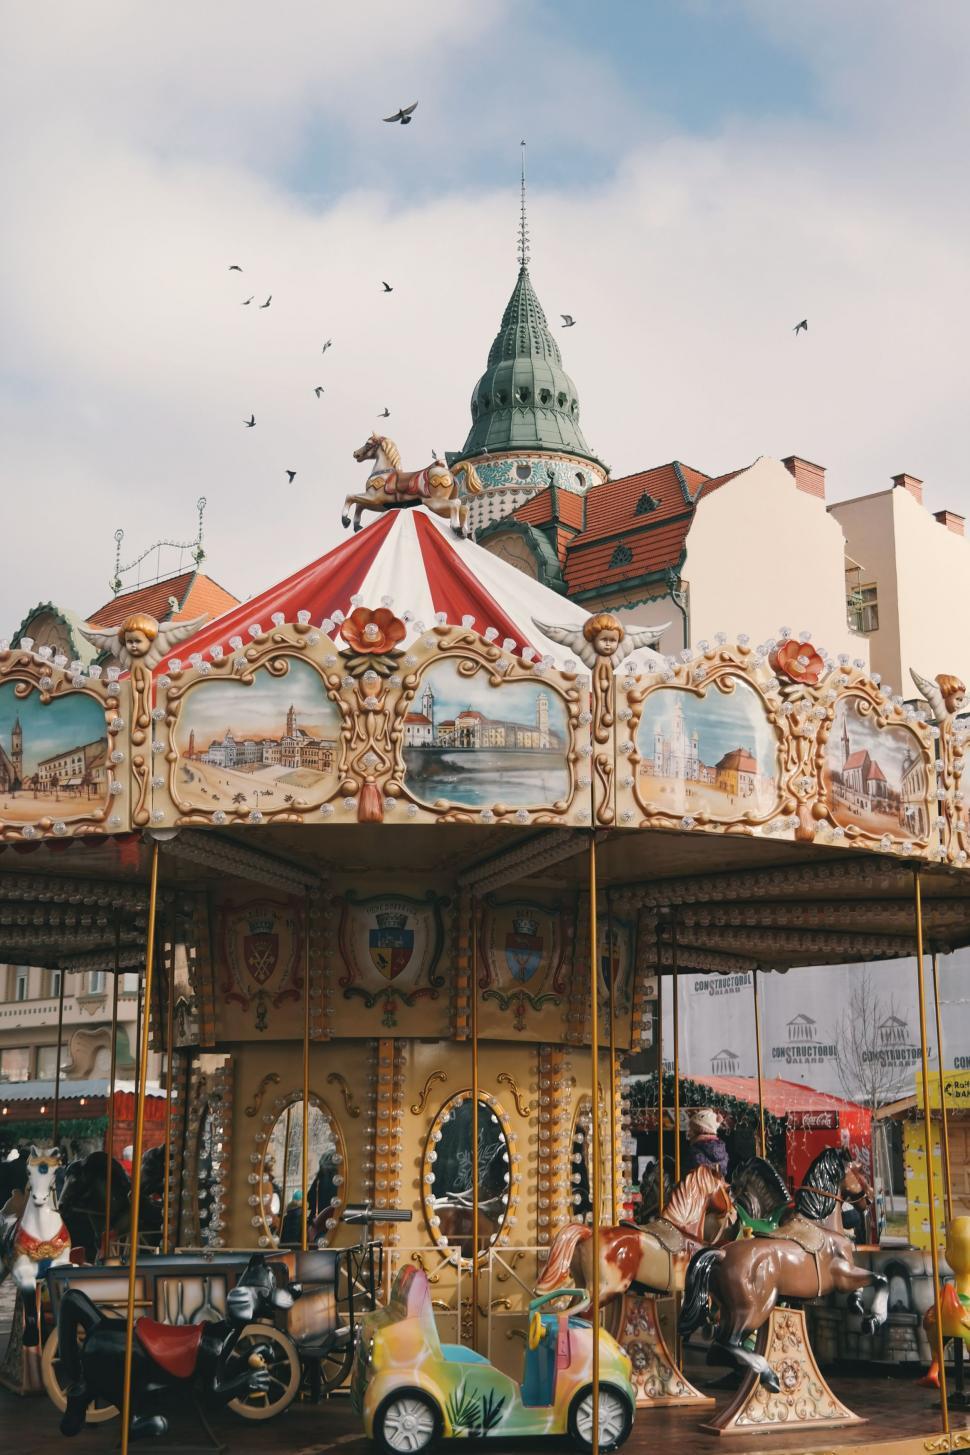 Free Image of Carousel With Horses and Carriages 